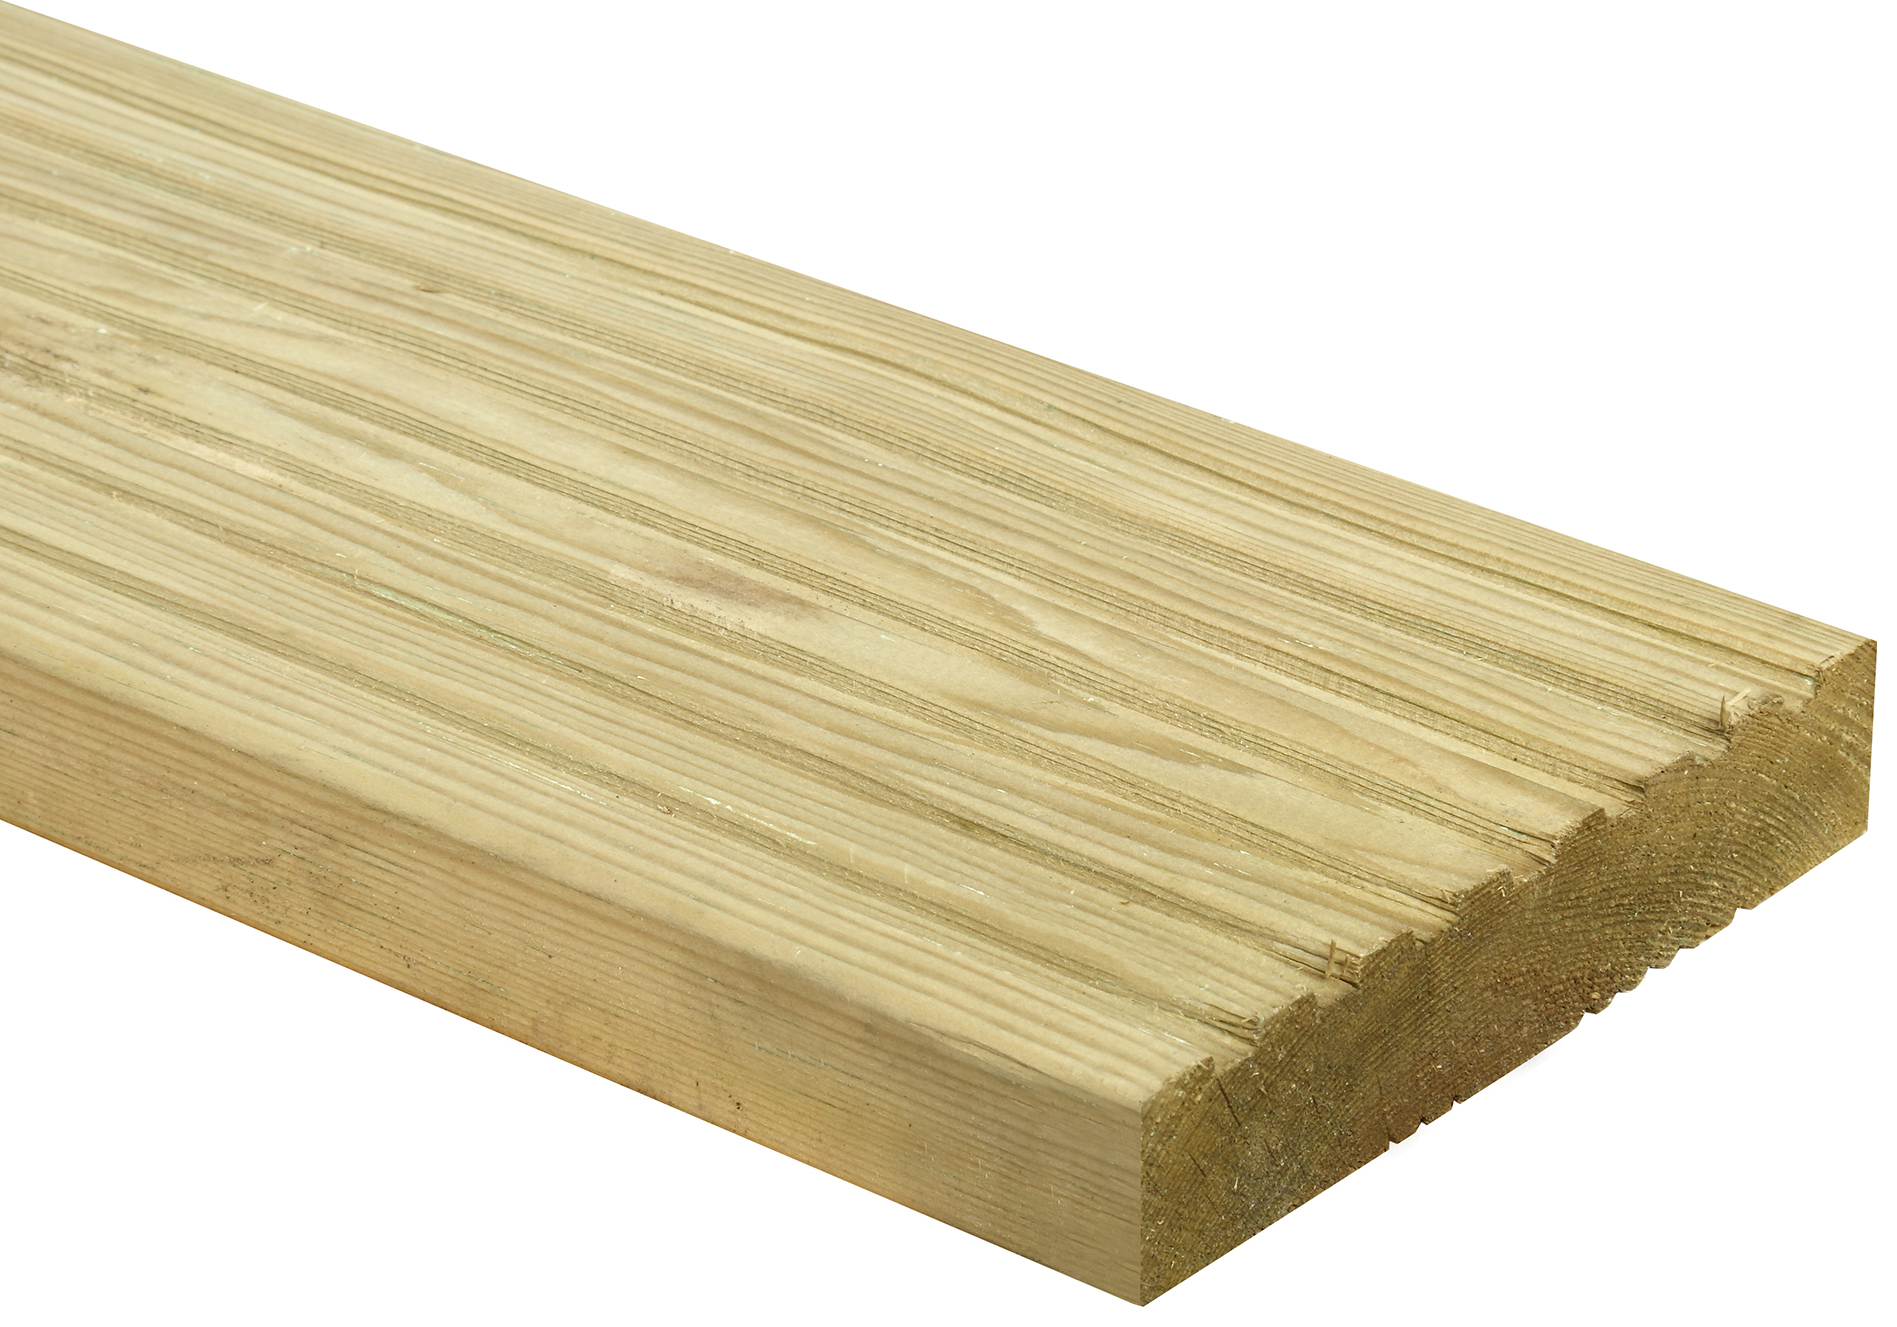 Image of Wickes Premium Natural Pine Deck Board - 28 x 140 x 3600mm